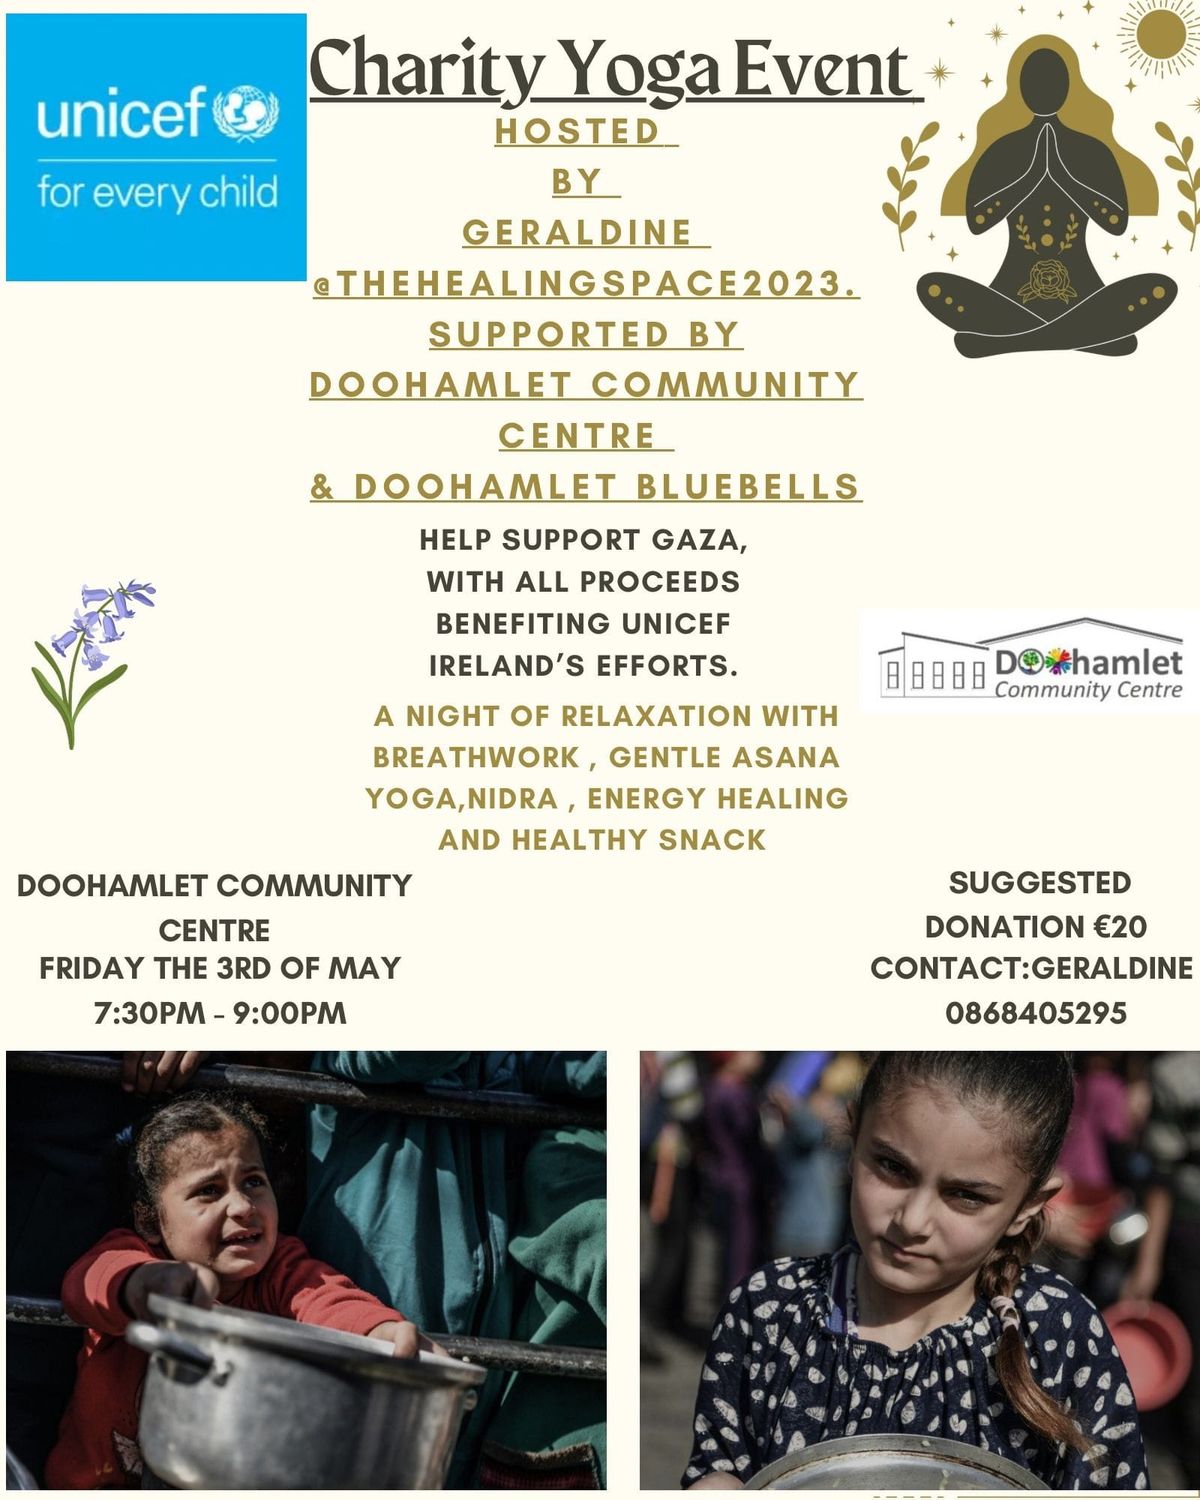  Charity Yoga Event An evening of rest & relaxation